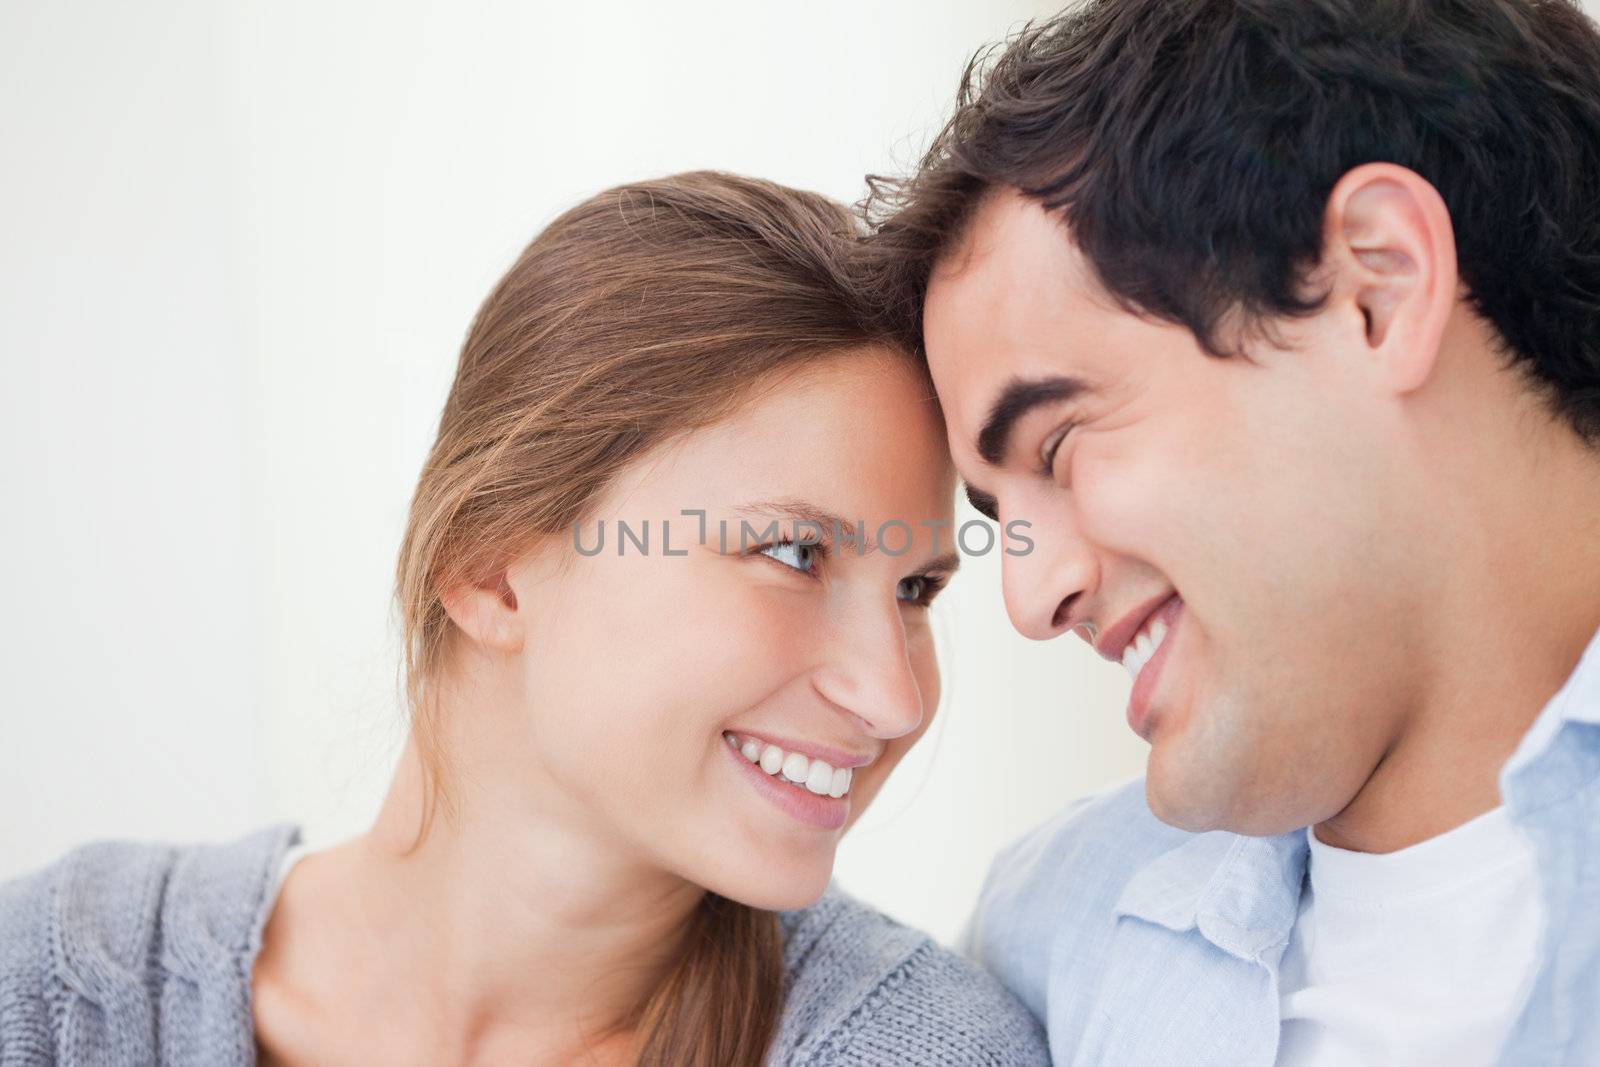 Couple smiling while touching forehead against grey background